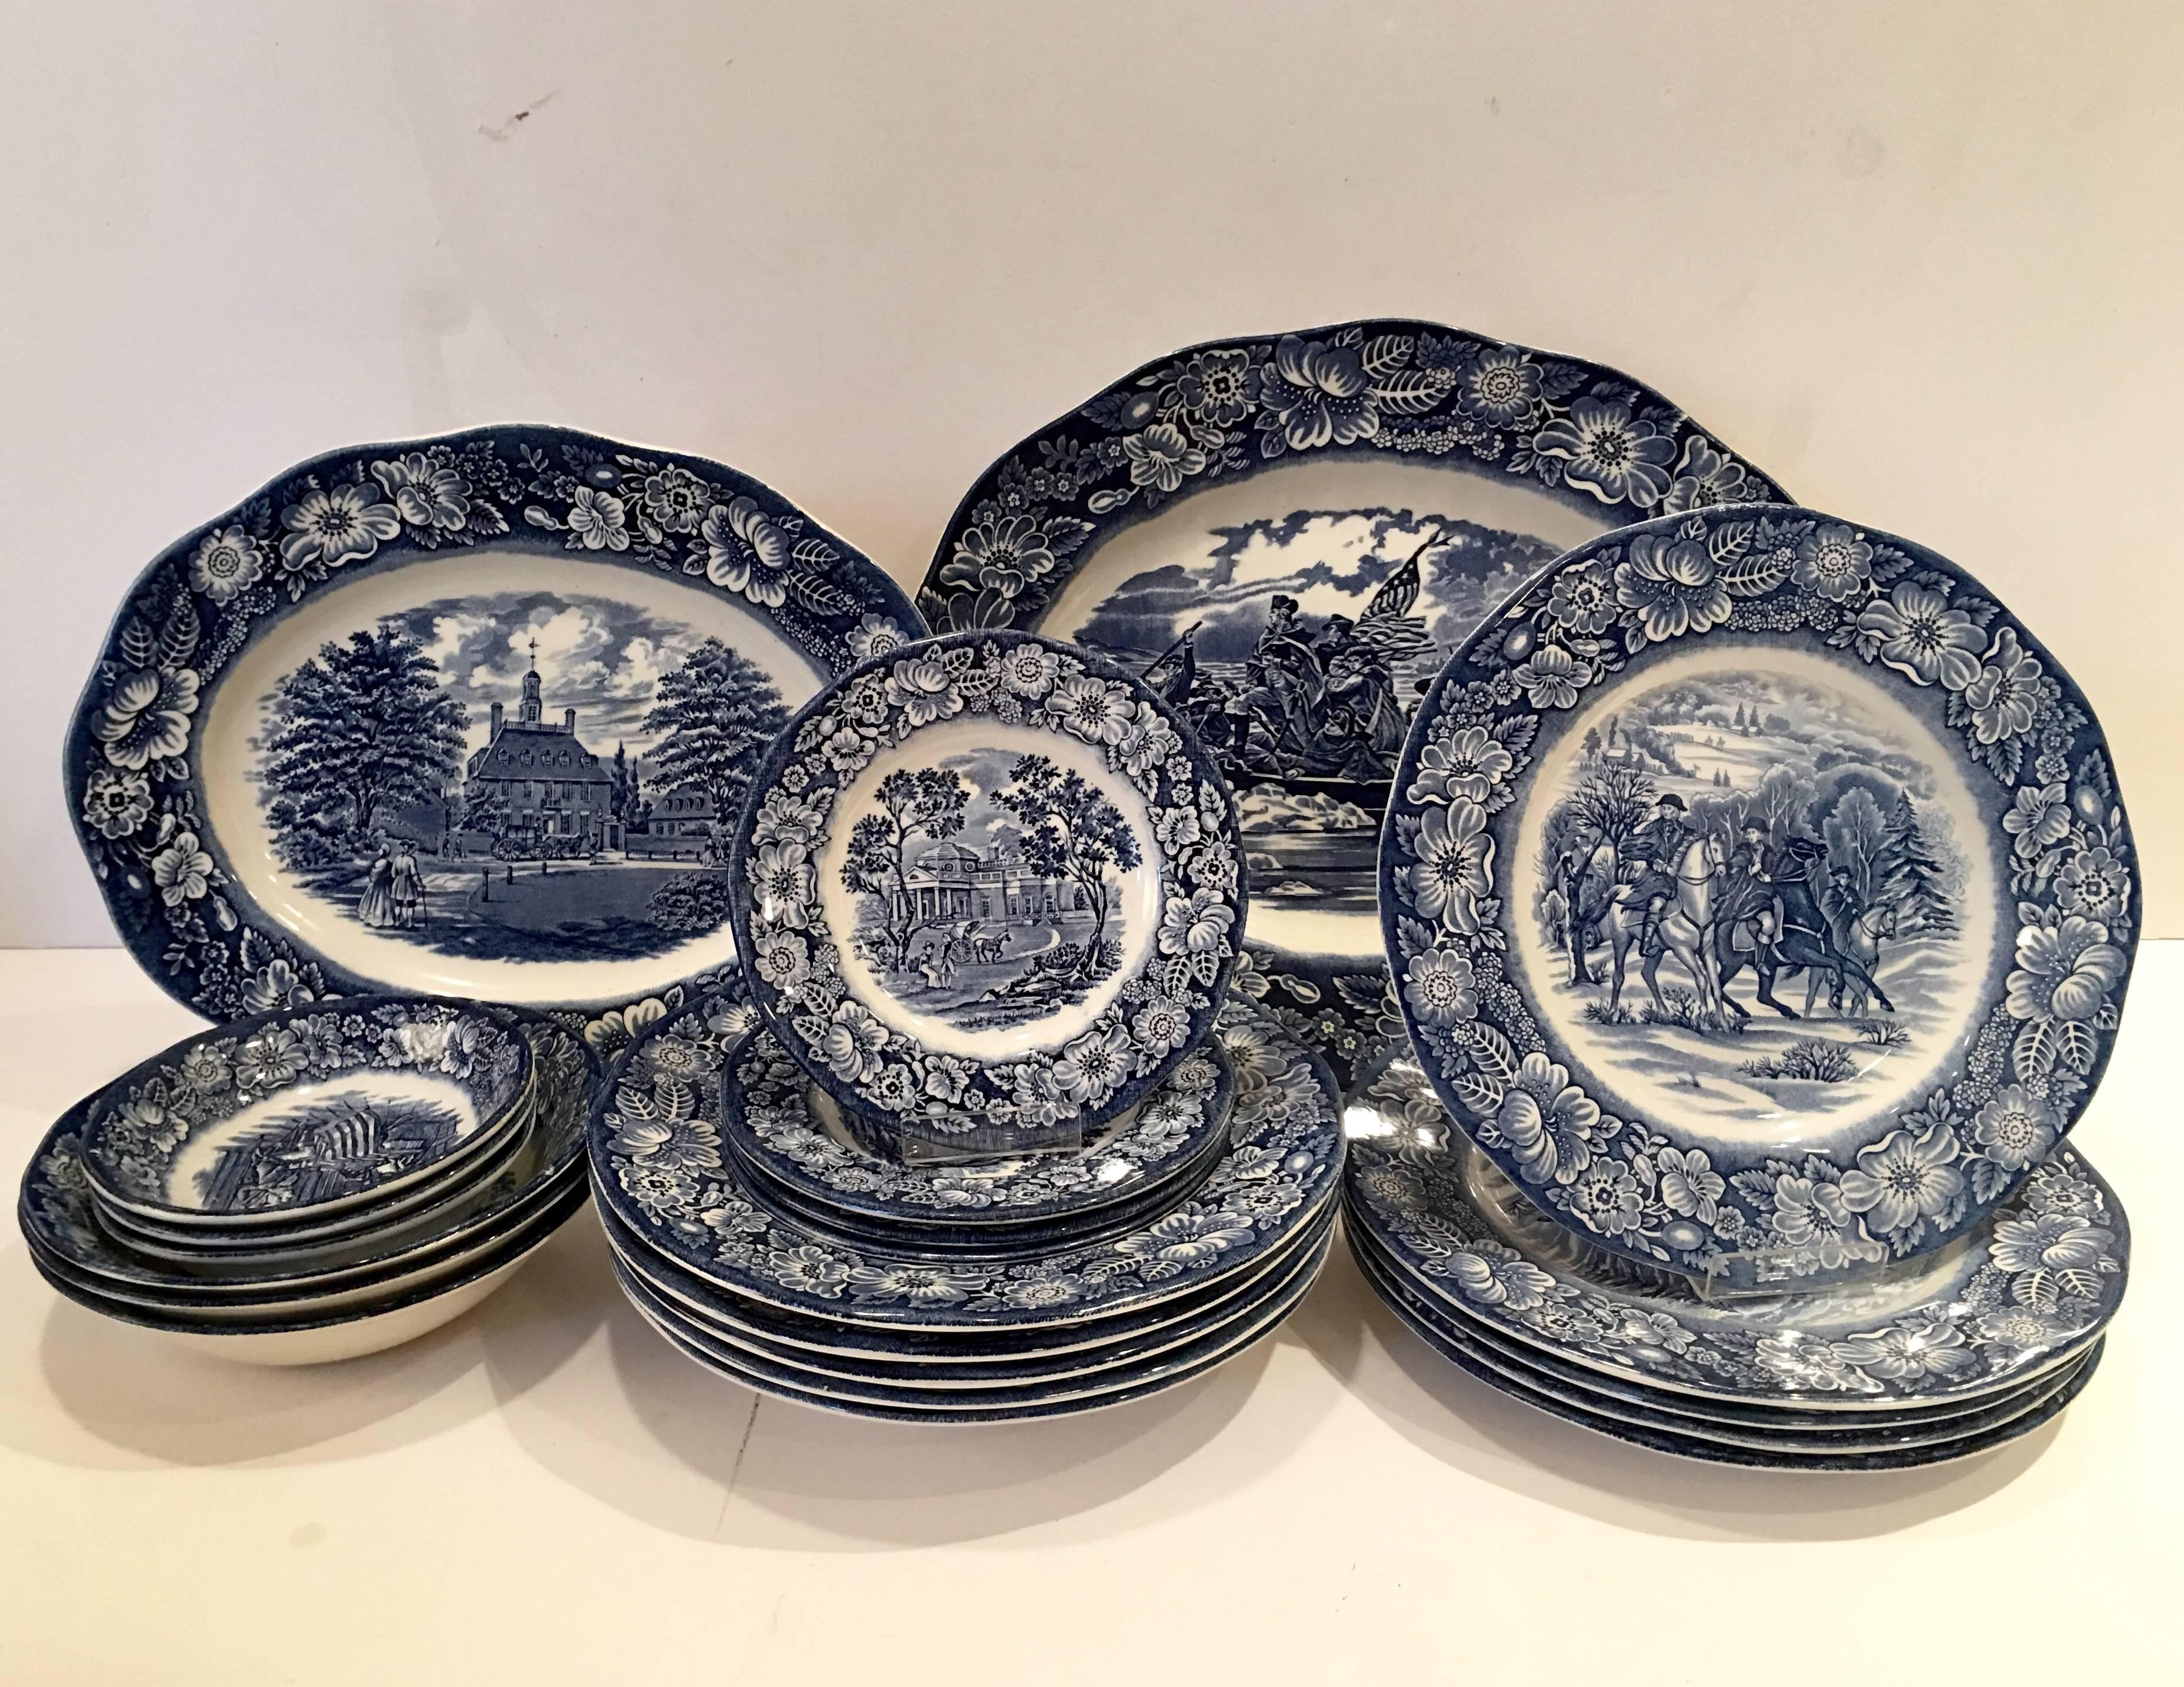 Vintage English 22-piece set of transferware by, Staffordshire in the Liberty Blue pattern. Liberty Blue features American Historical Scenes. This 22-piece set includes:
Five rim soup bowls, 8.75" dia.
Five luncheon plates, 9" dia.
Four